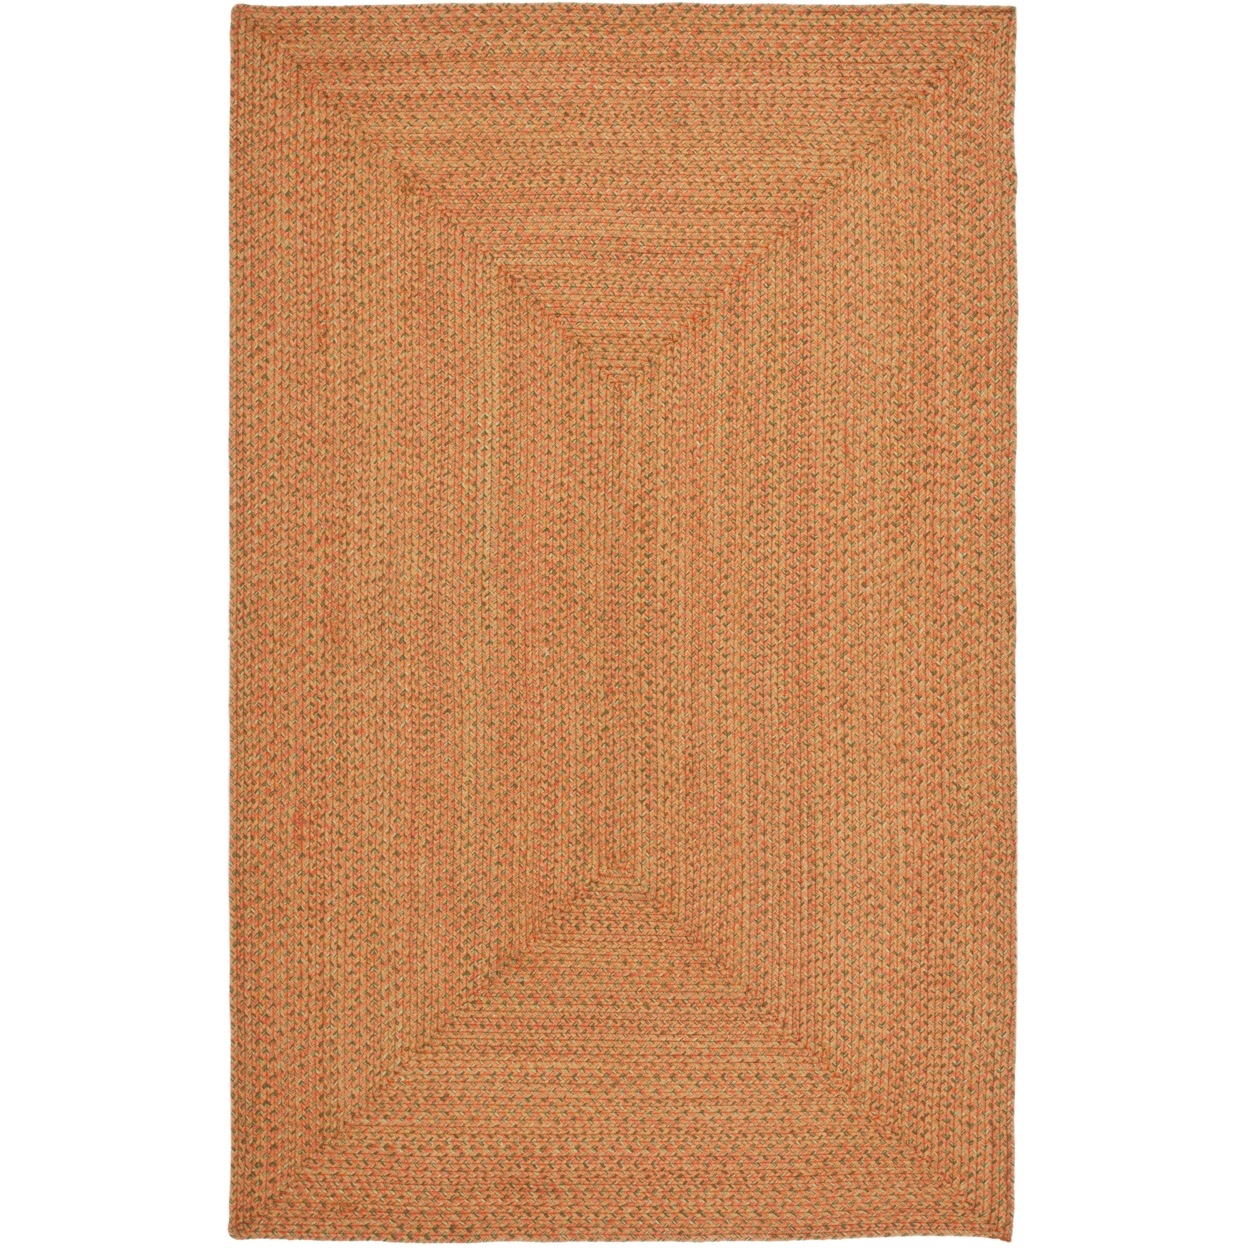 SAFAVIEH Braided Collection BRD166A Handwoven Multi Rug - 3' X 5' Oval